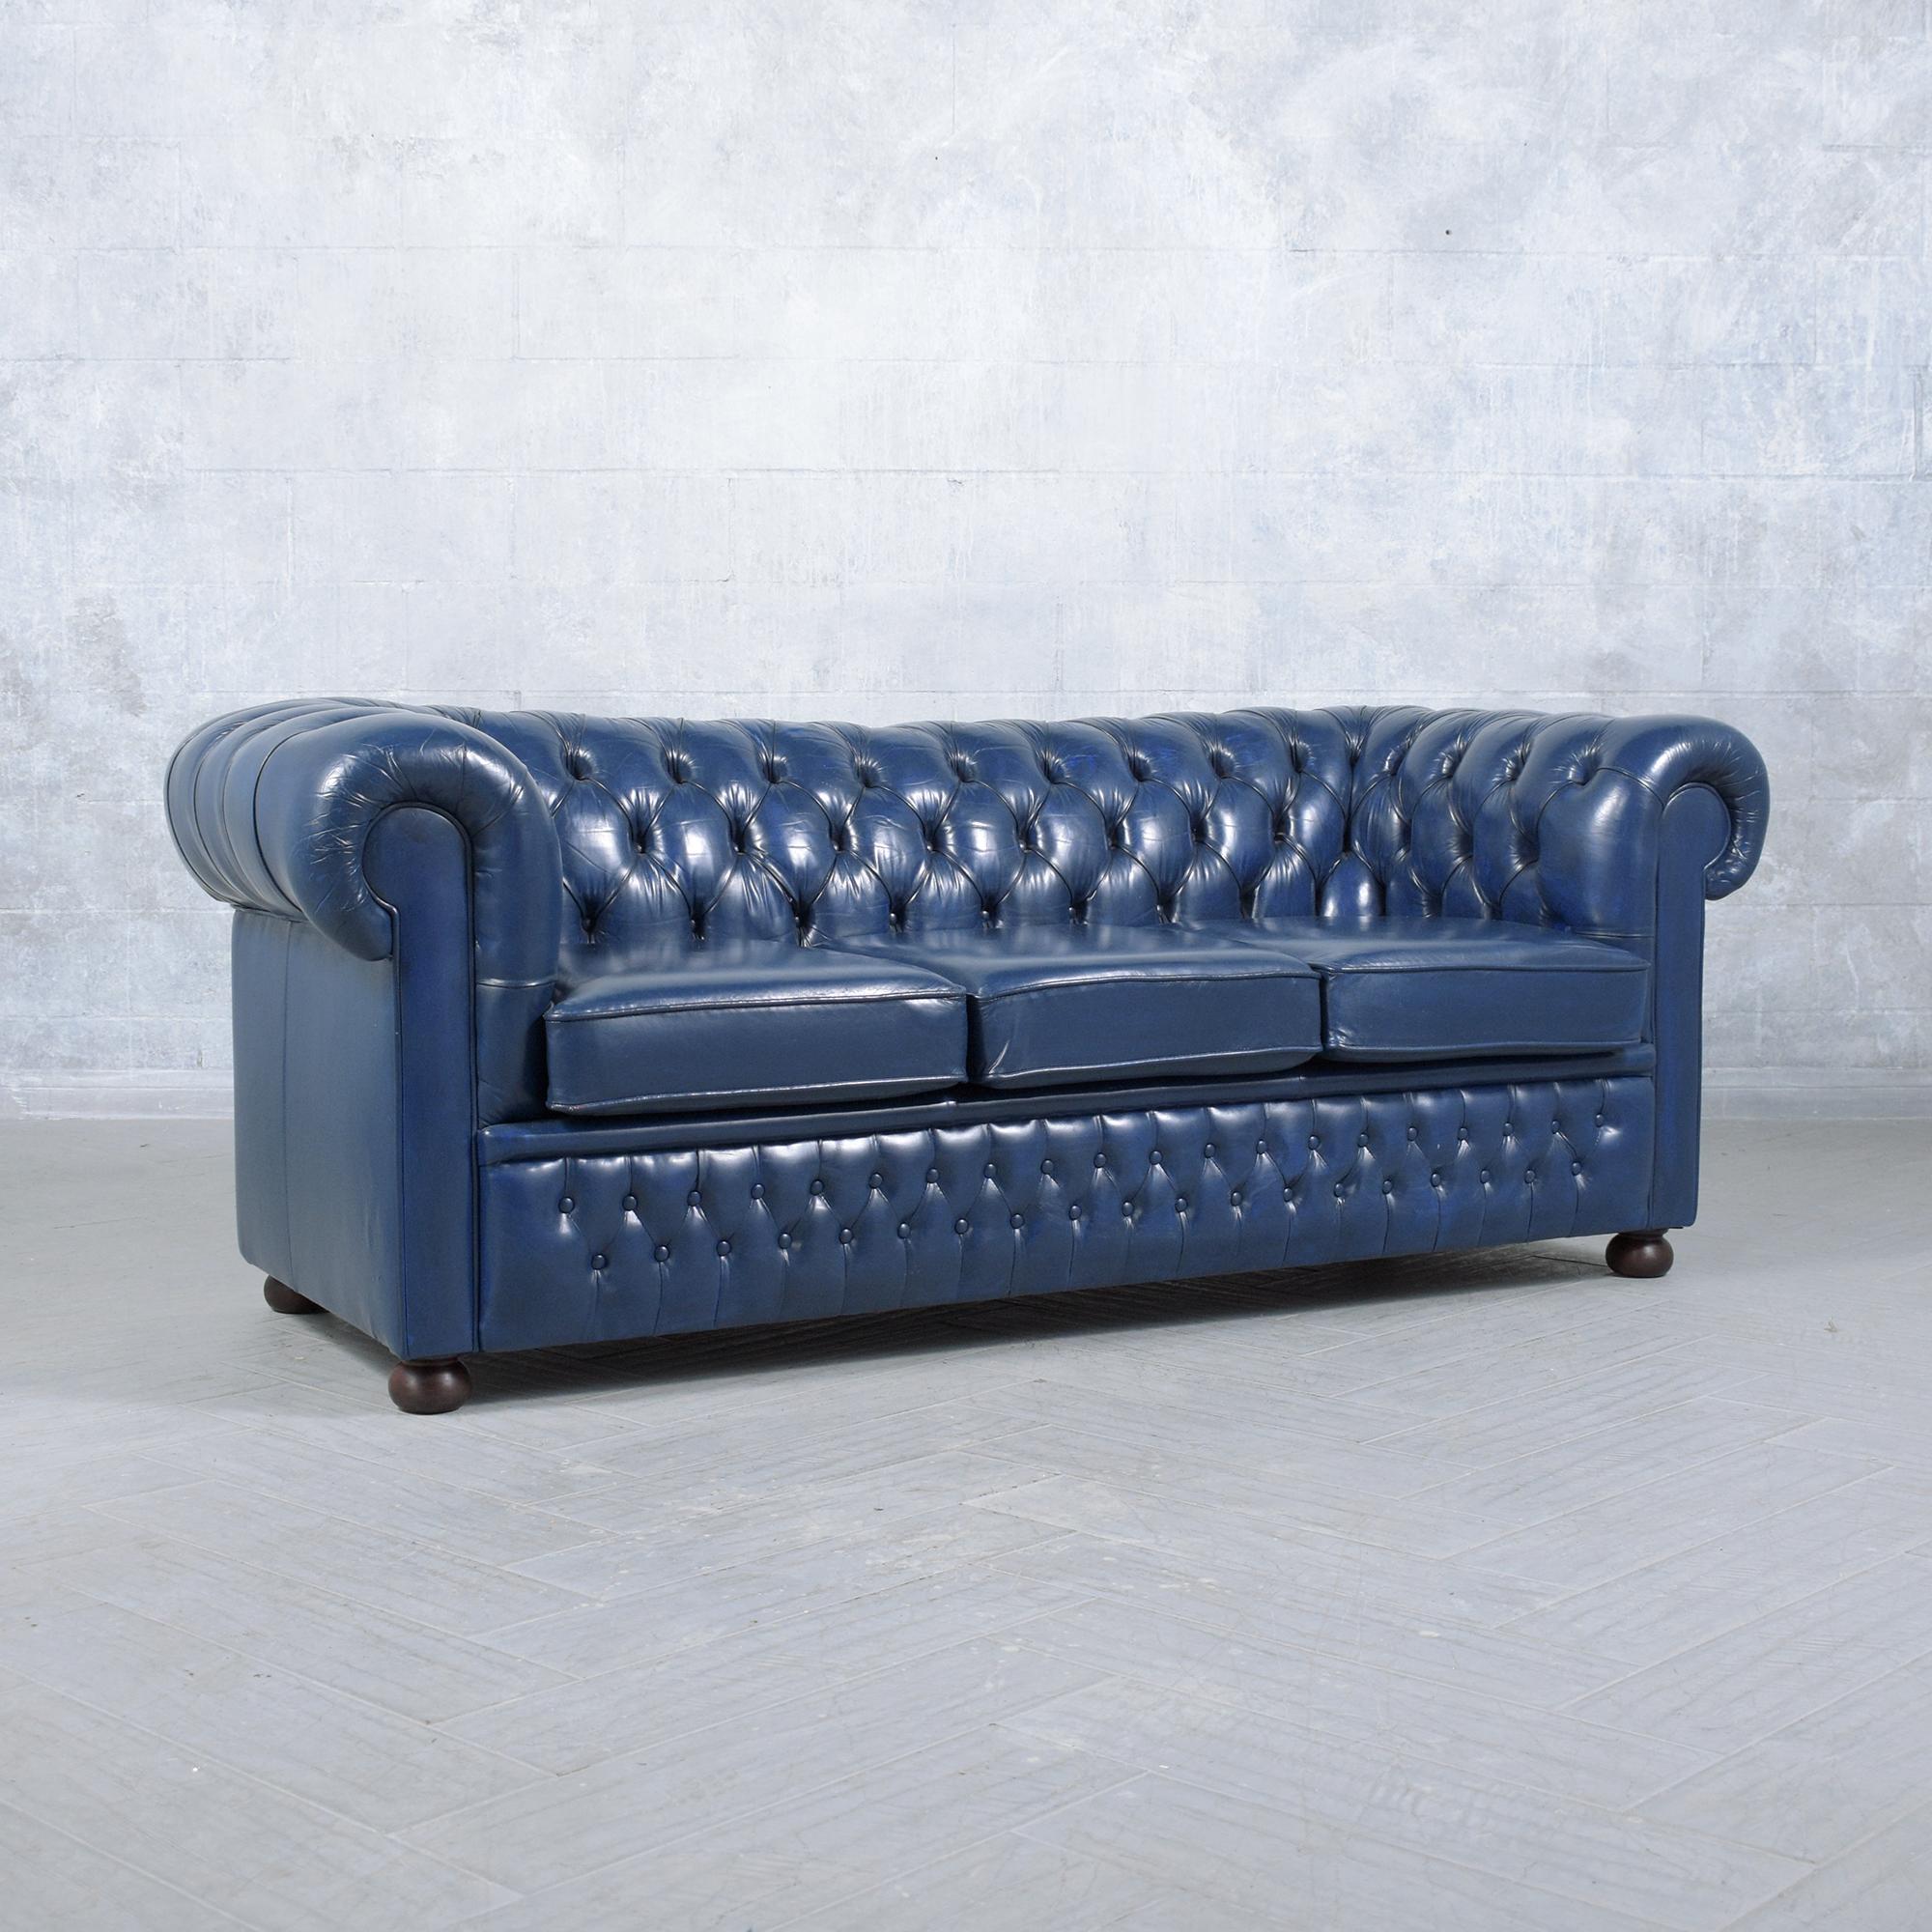 Restored Vintage Chesterfield Sofa in Distressed Navy Leather In Good Condition For Sale In Los Angeles, CA